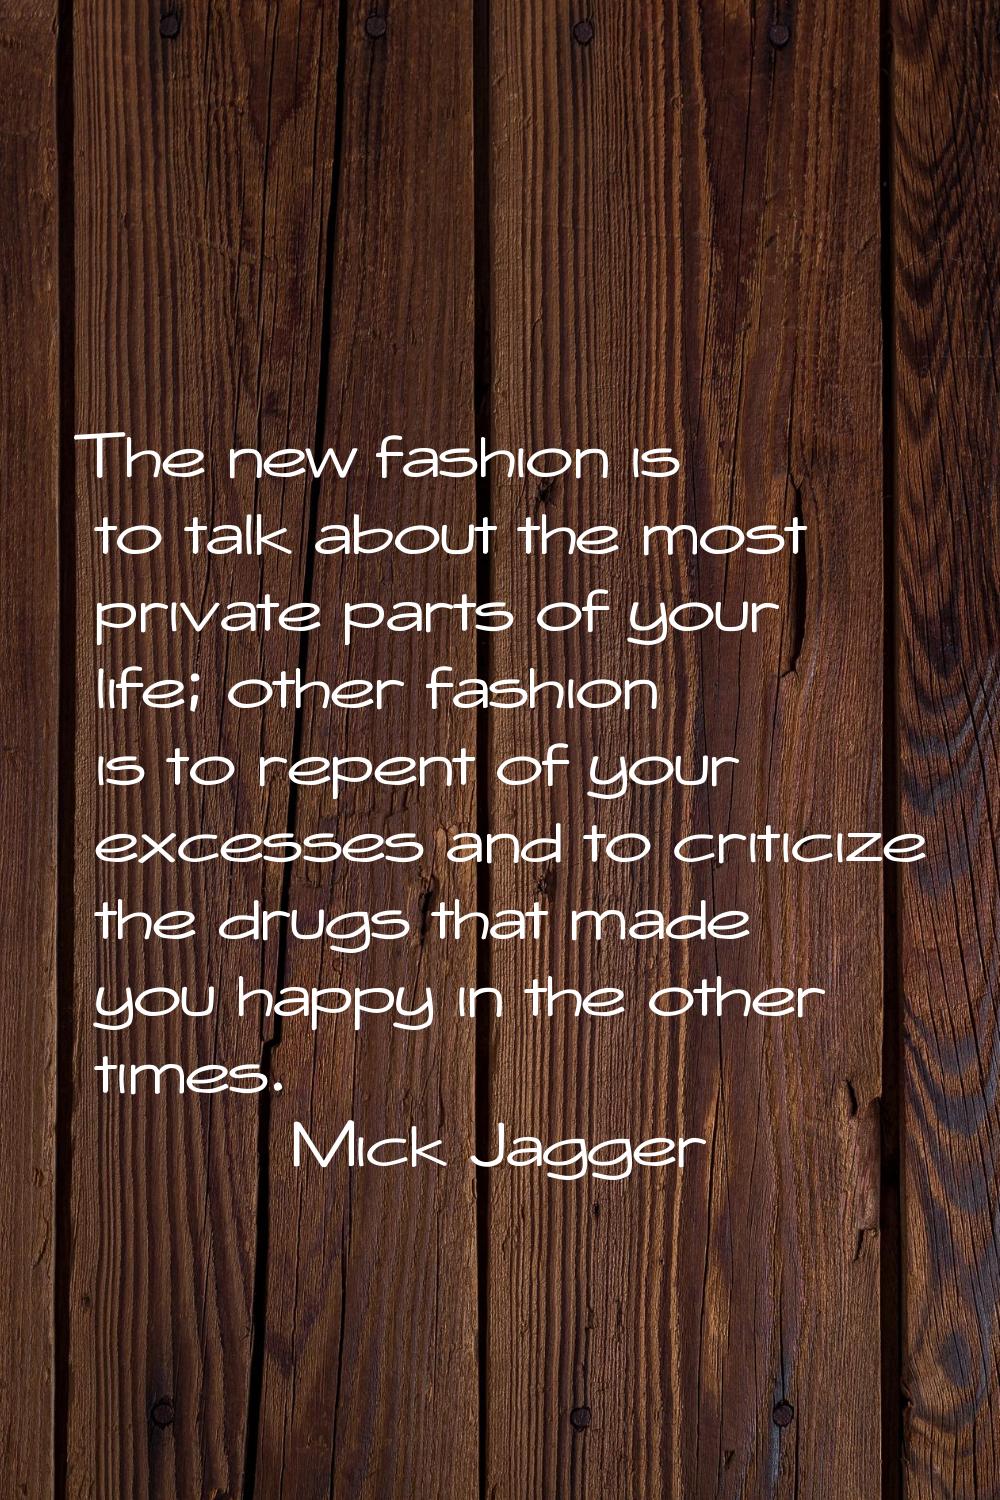 The new fashion is to talk about the most private parts of your life; other fashion is to repent of